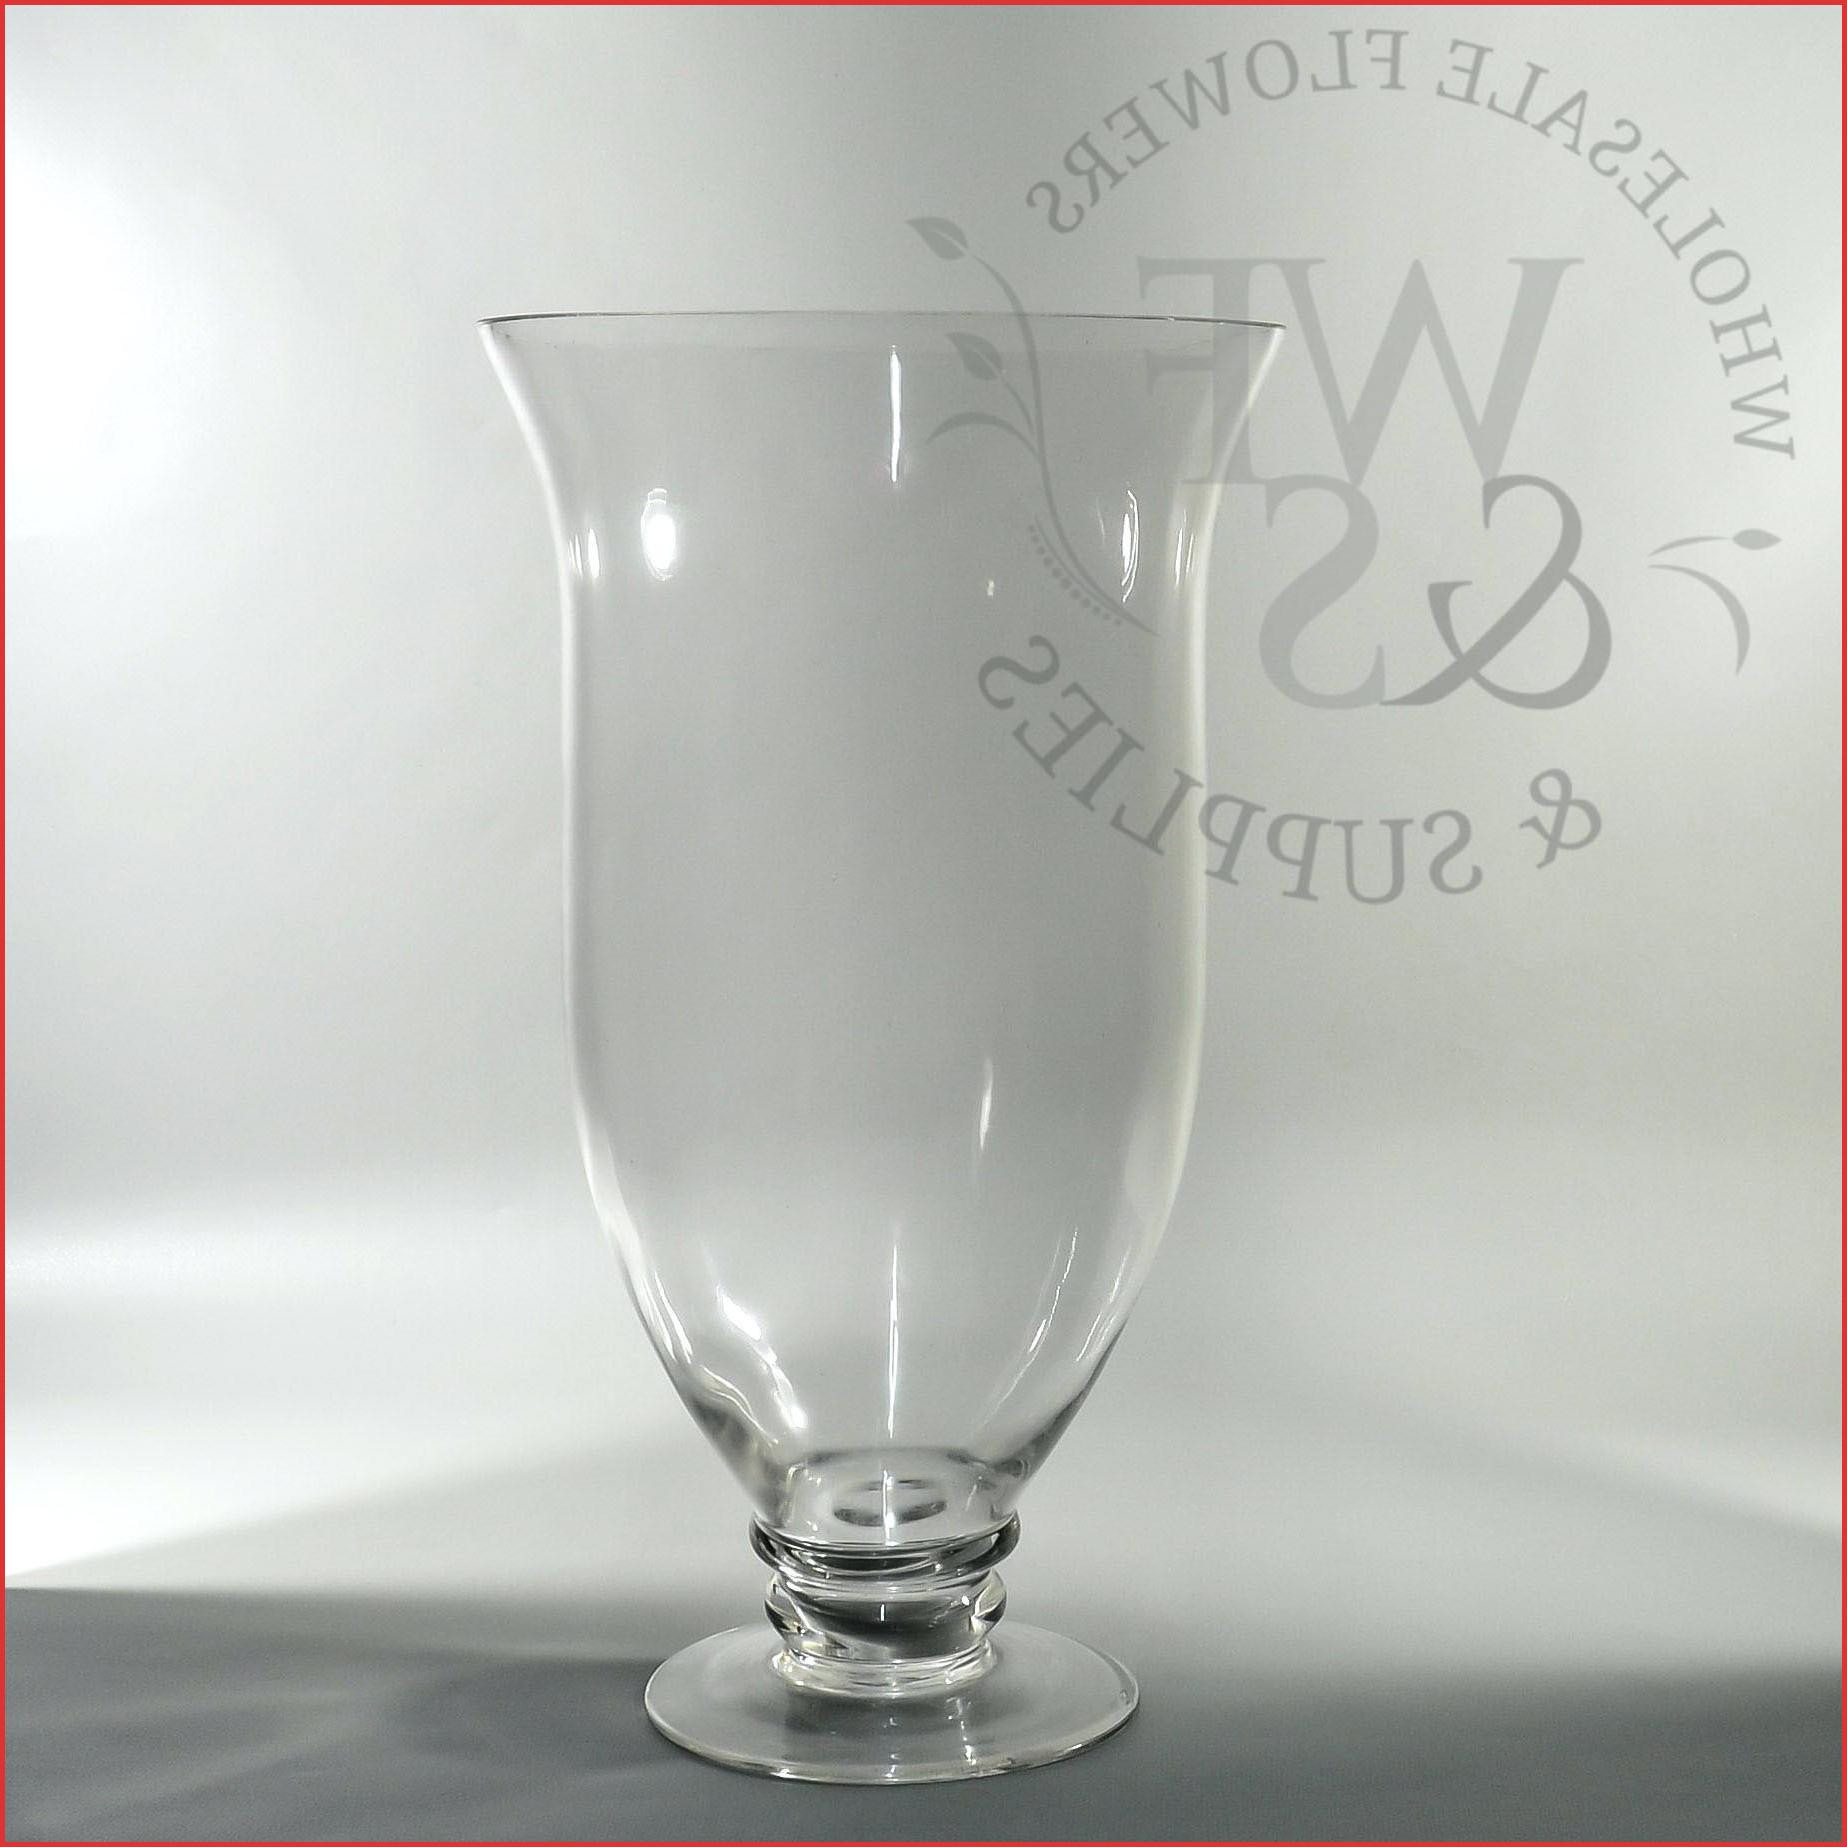 12 Trendy Waterford Crystal Bud Vase 2024 free download waterford crystal bud vase of beautiful cheap wedding vases stringcheesetheory us in glass vases for cheap wedding vases awesome sunflower wedding invitations from cheap wedding centerpieces